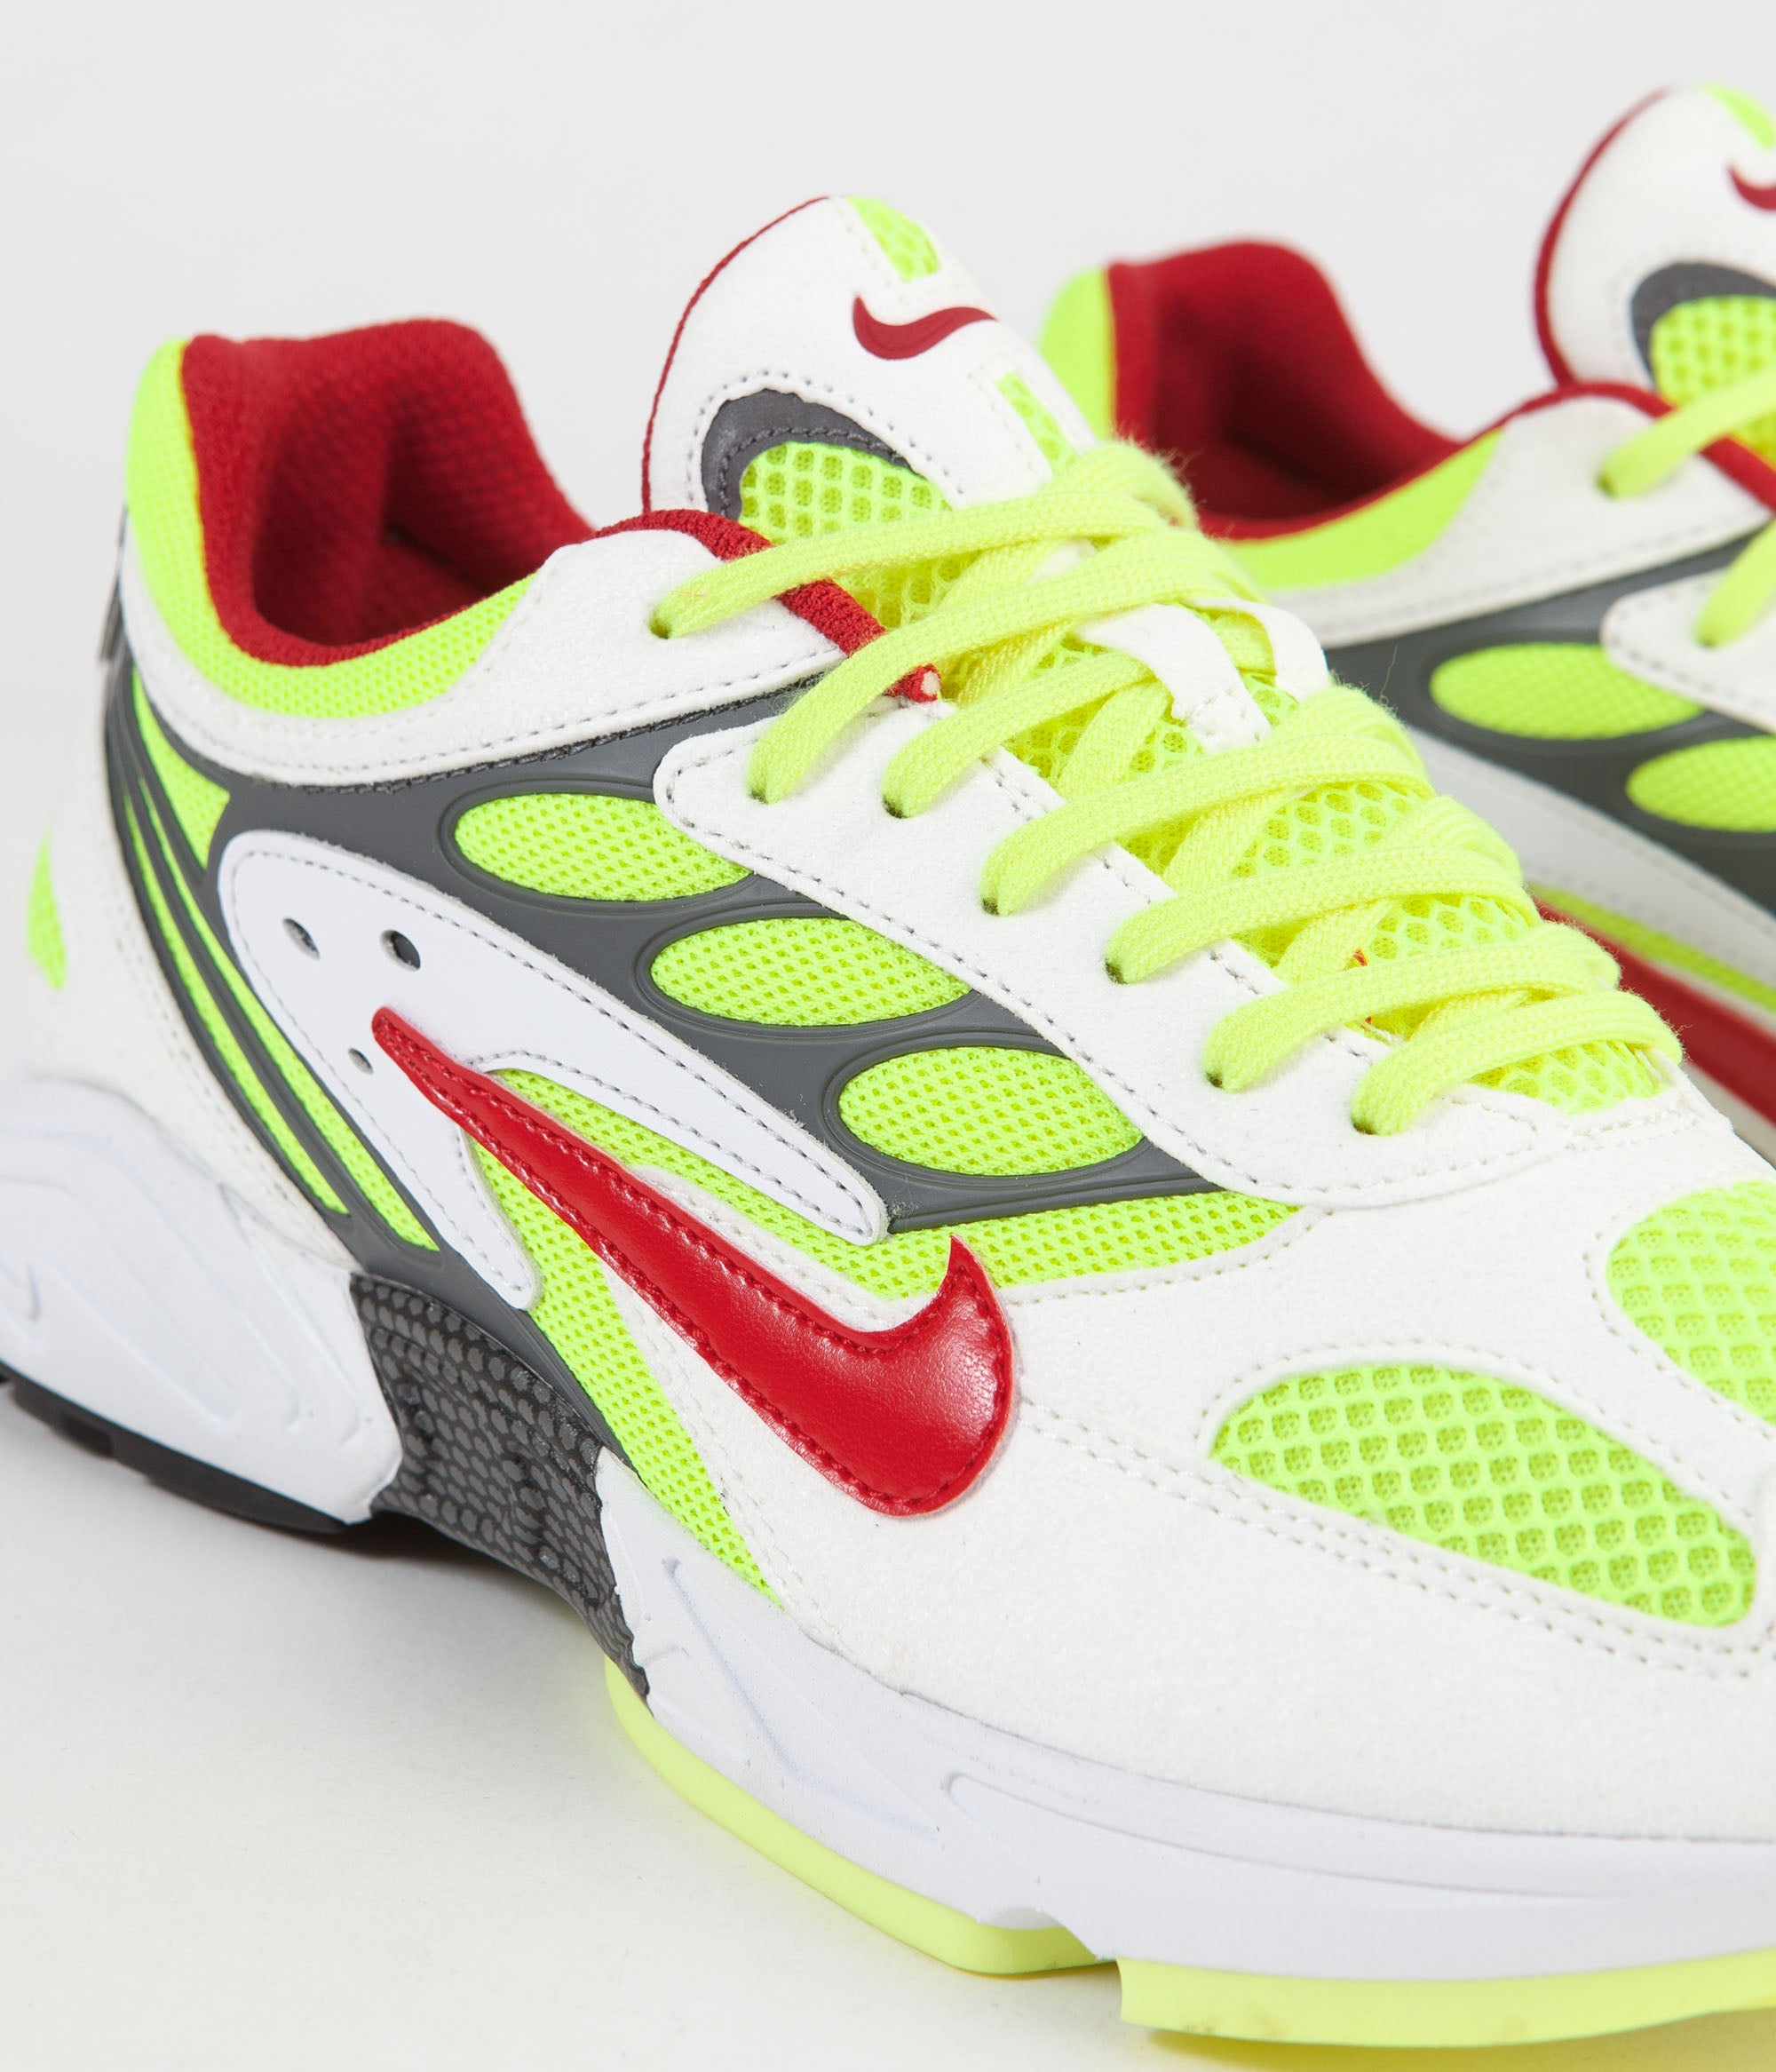 nike air ghost racer white atom red neon yellow